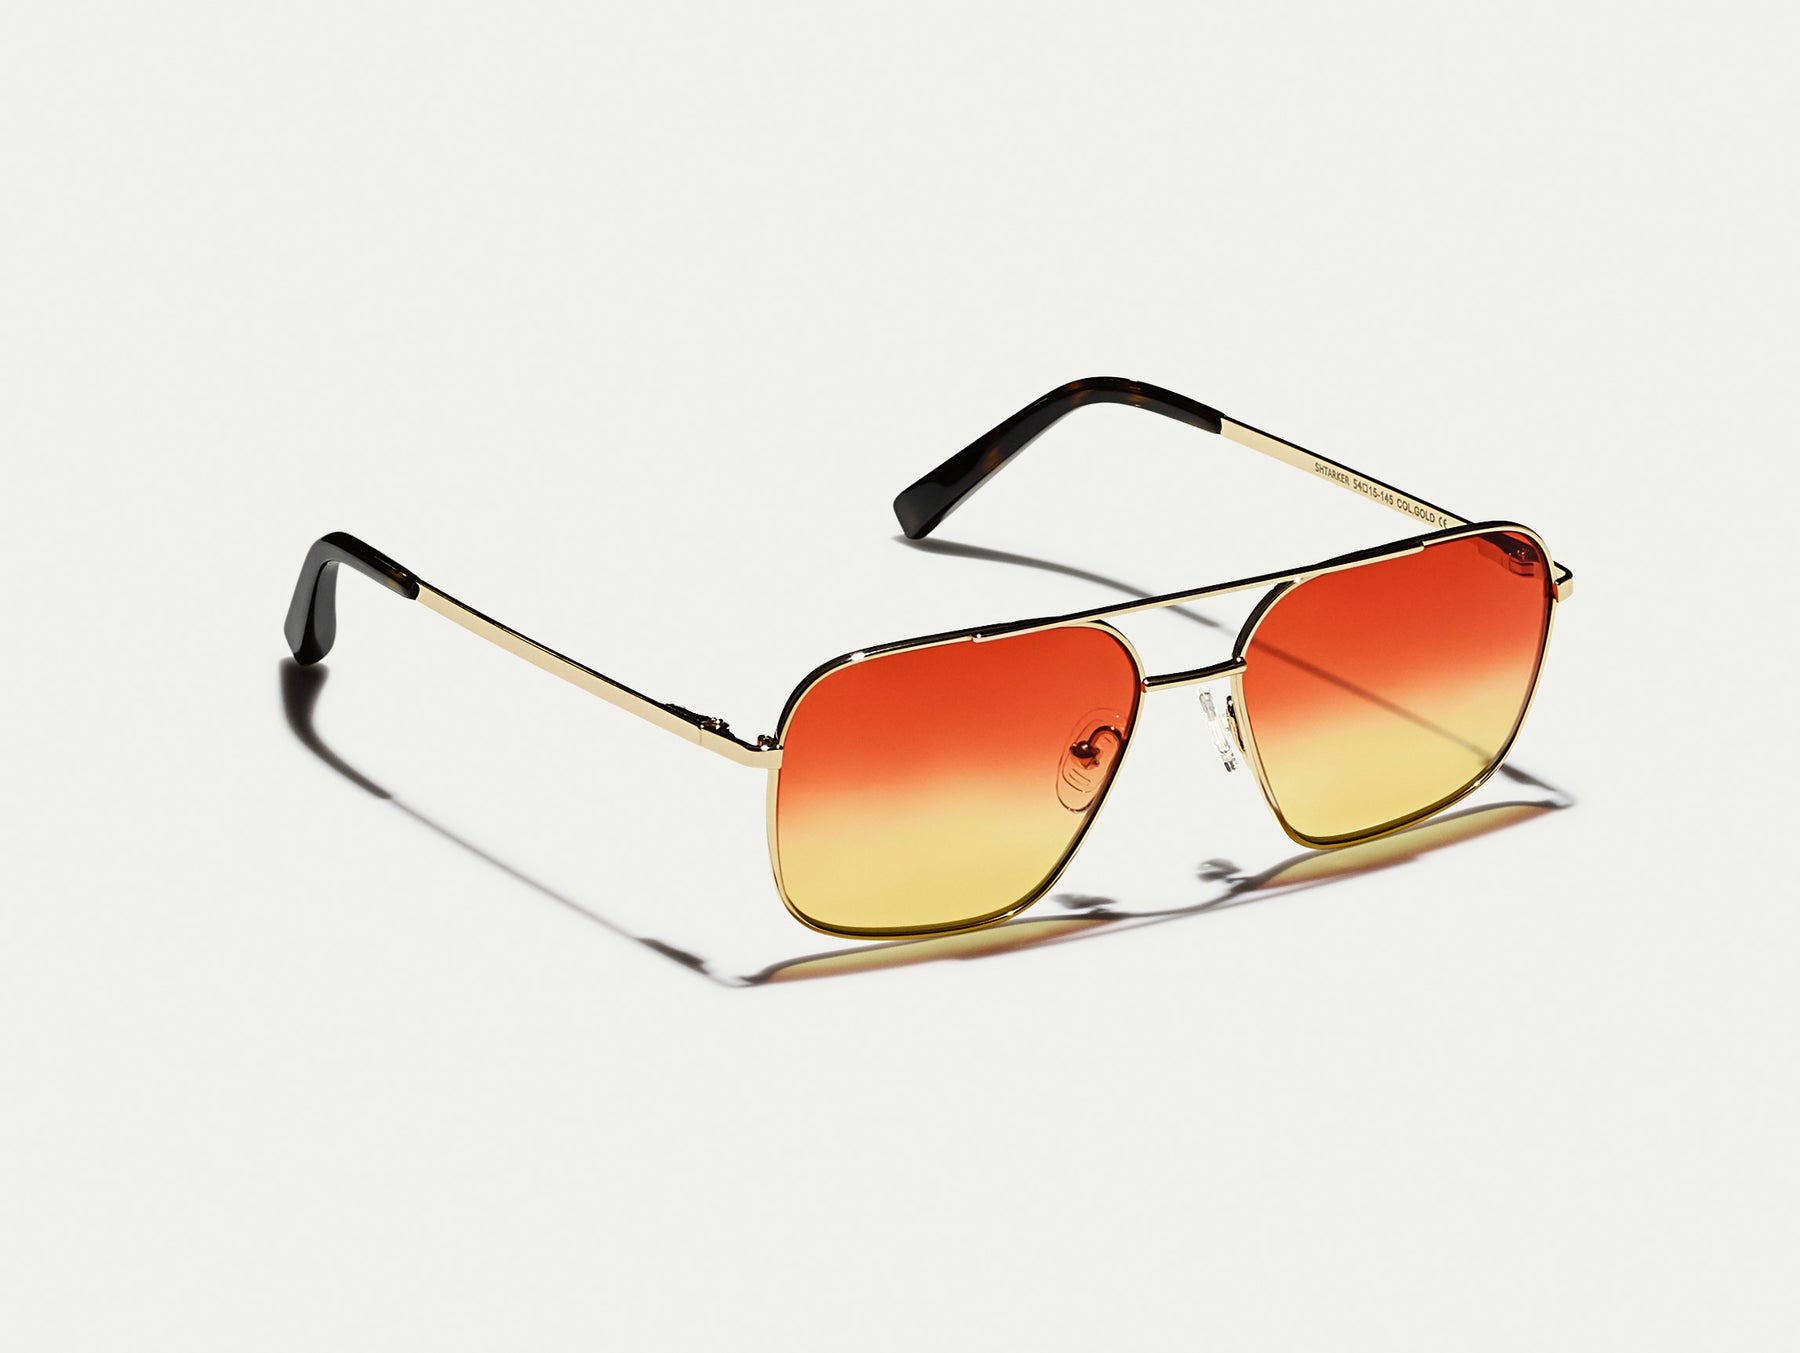 The SHTARKER in Gold with Candy Corn Tinted Lenses